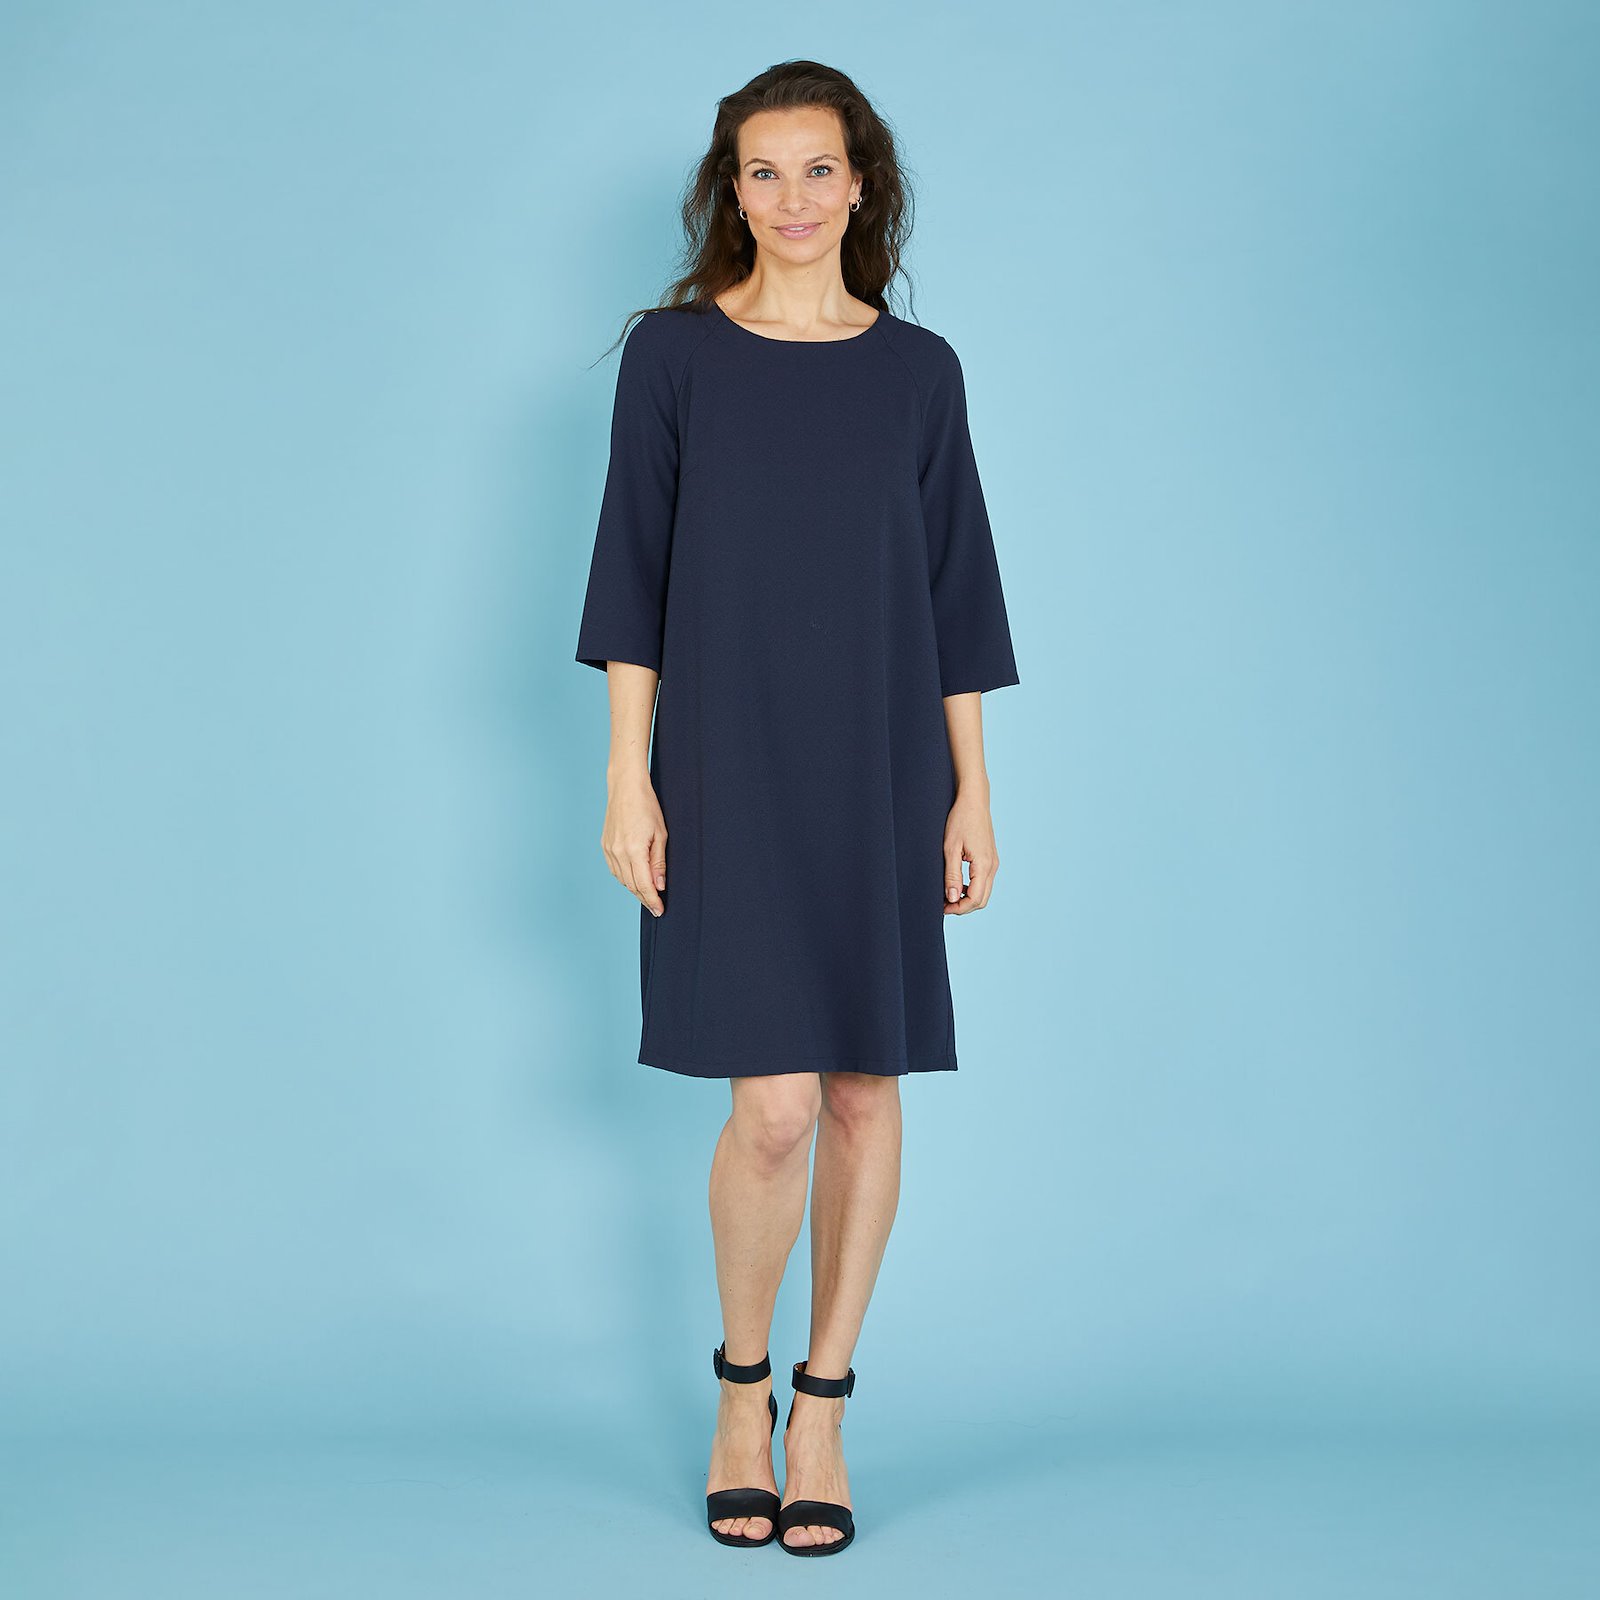 Dress with A-shape and raglan sle, 40/12 p23175000_p23175001_p23175002_p23175003_p23175004_pack_d